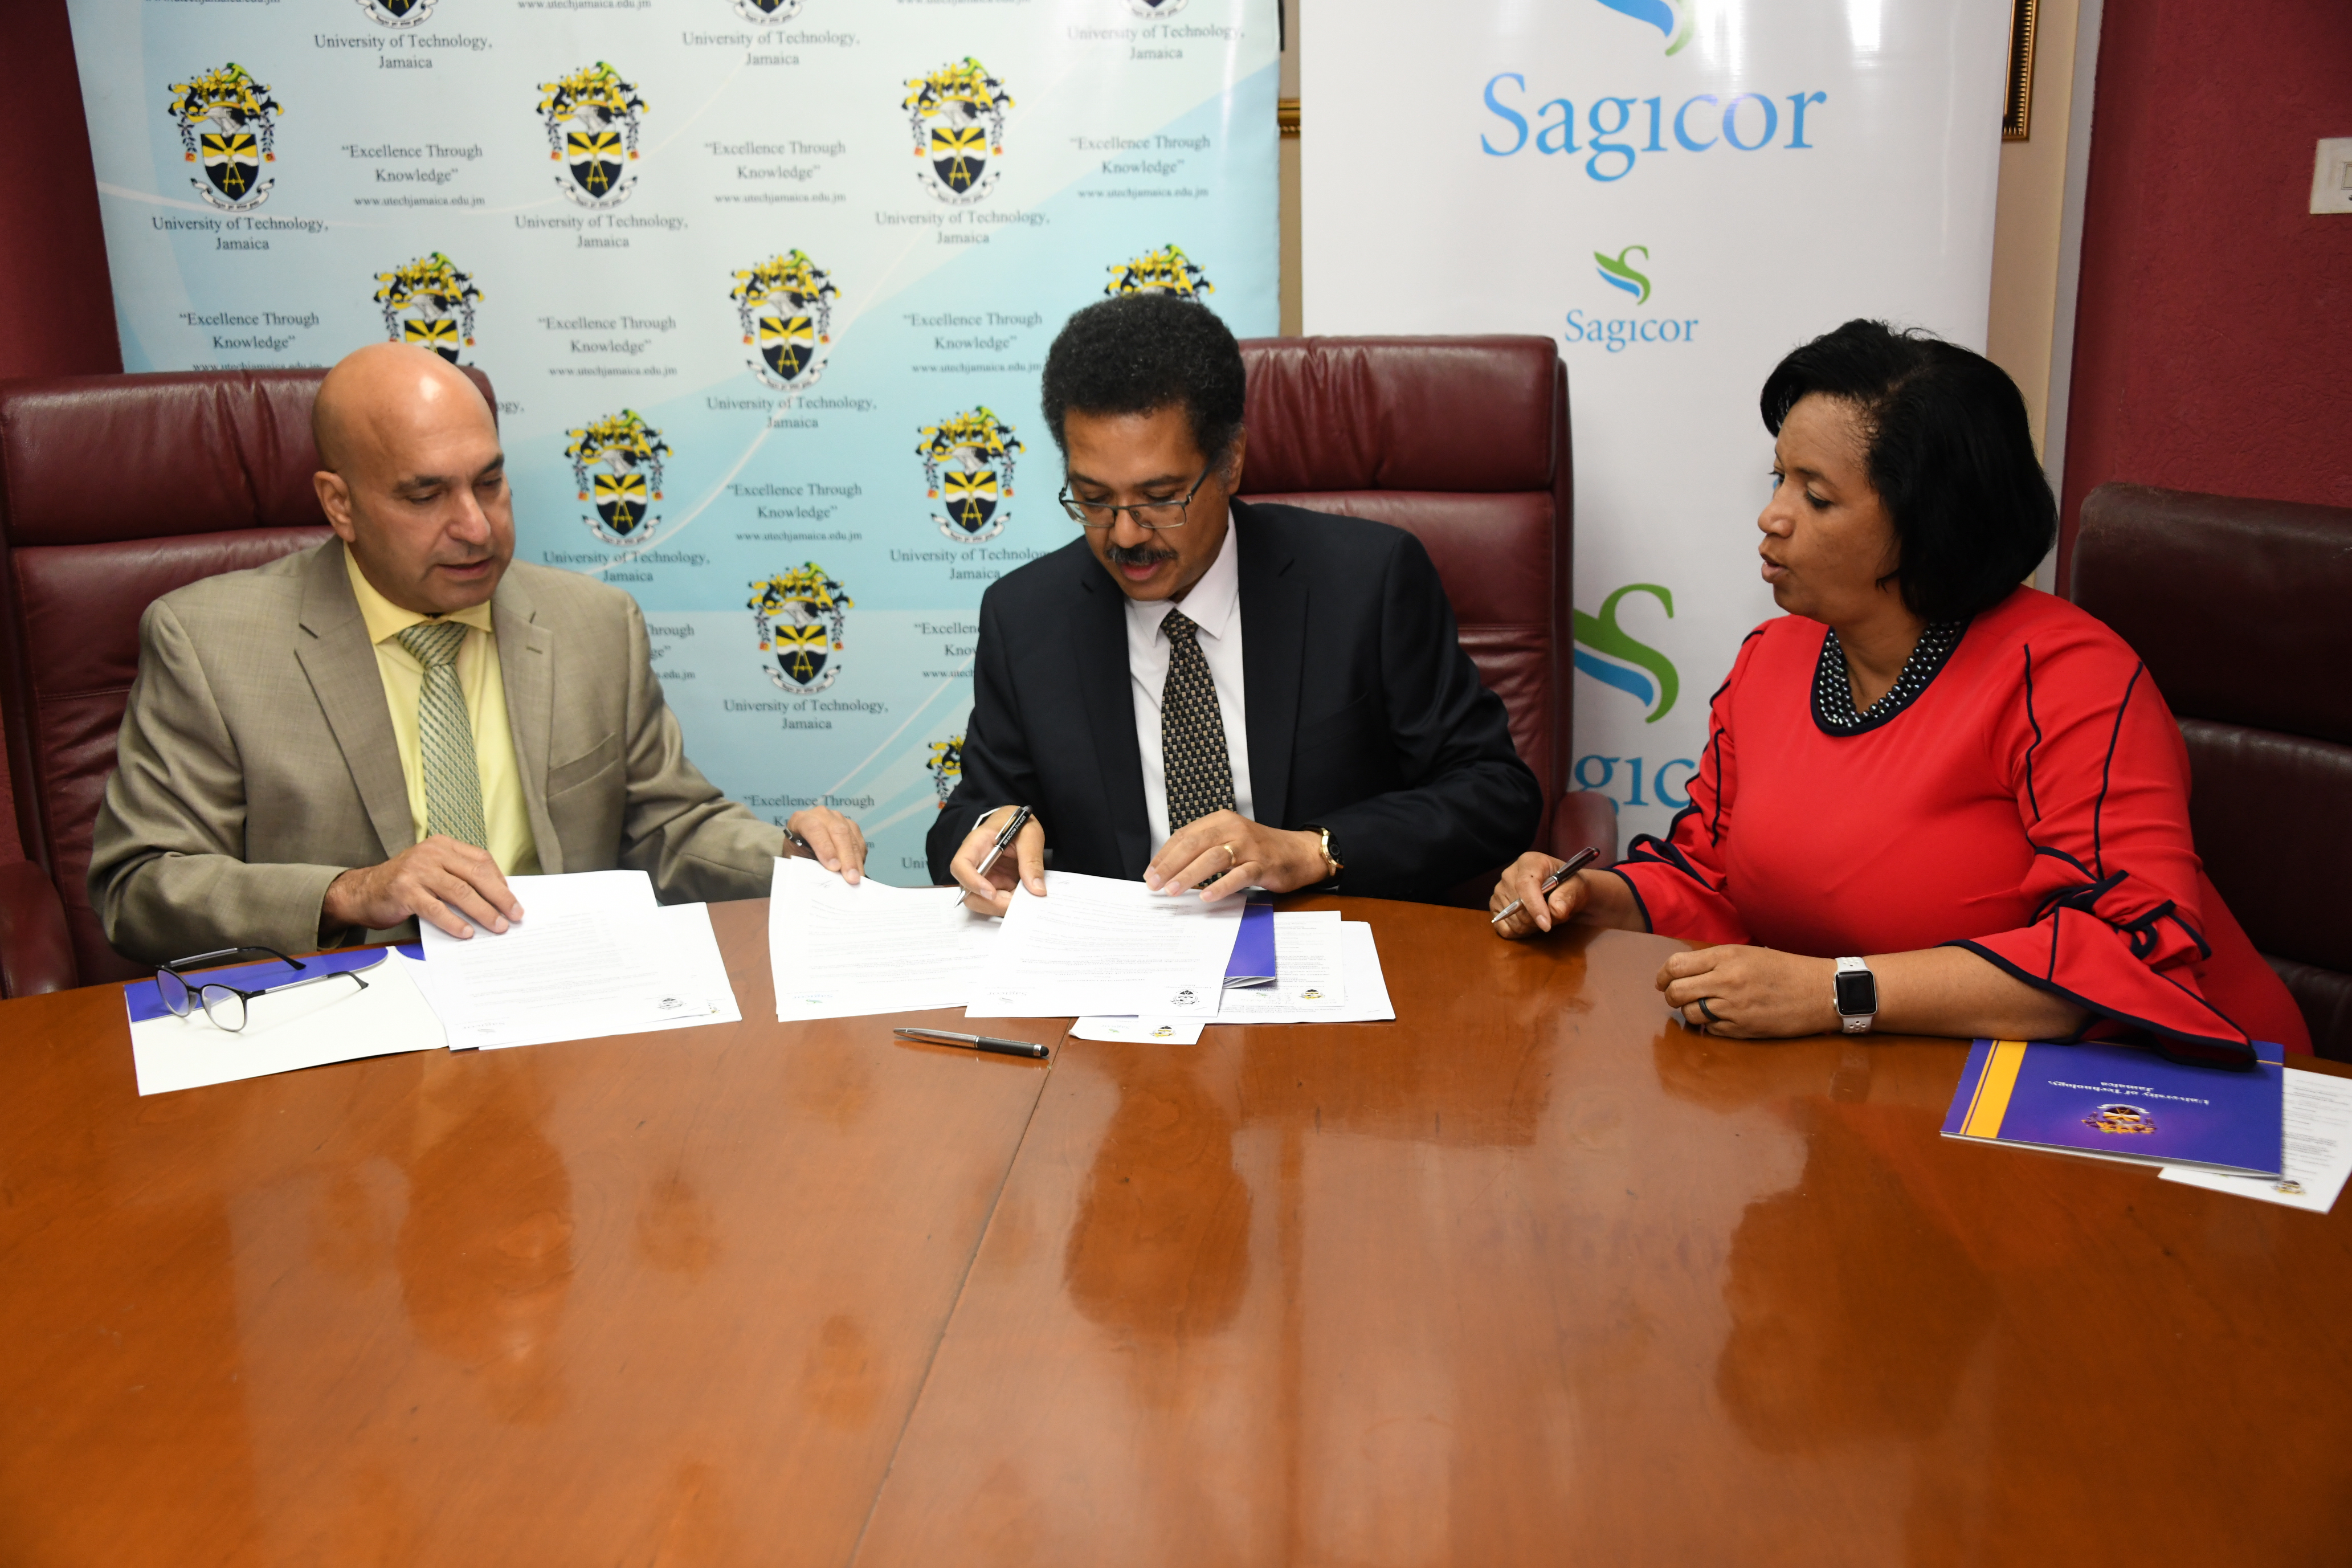 UTech, Ja and Sagicor Sign Mou to Collaborate on IT Initiatives